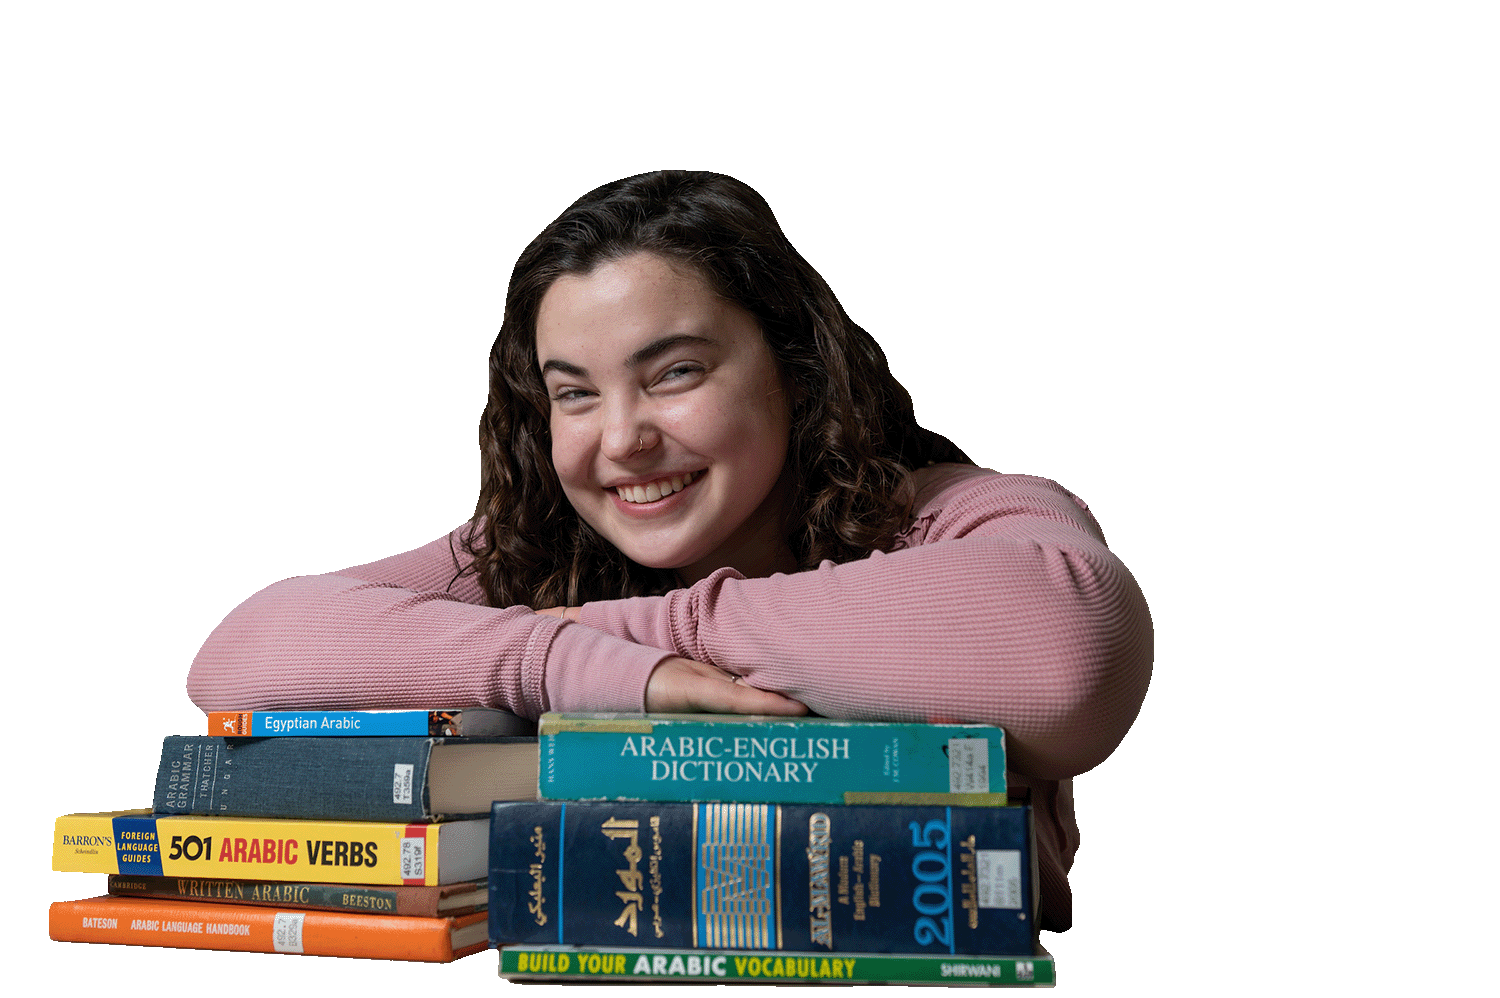 A student rests her elbows on two stacks of books and smiles at the camera